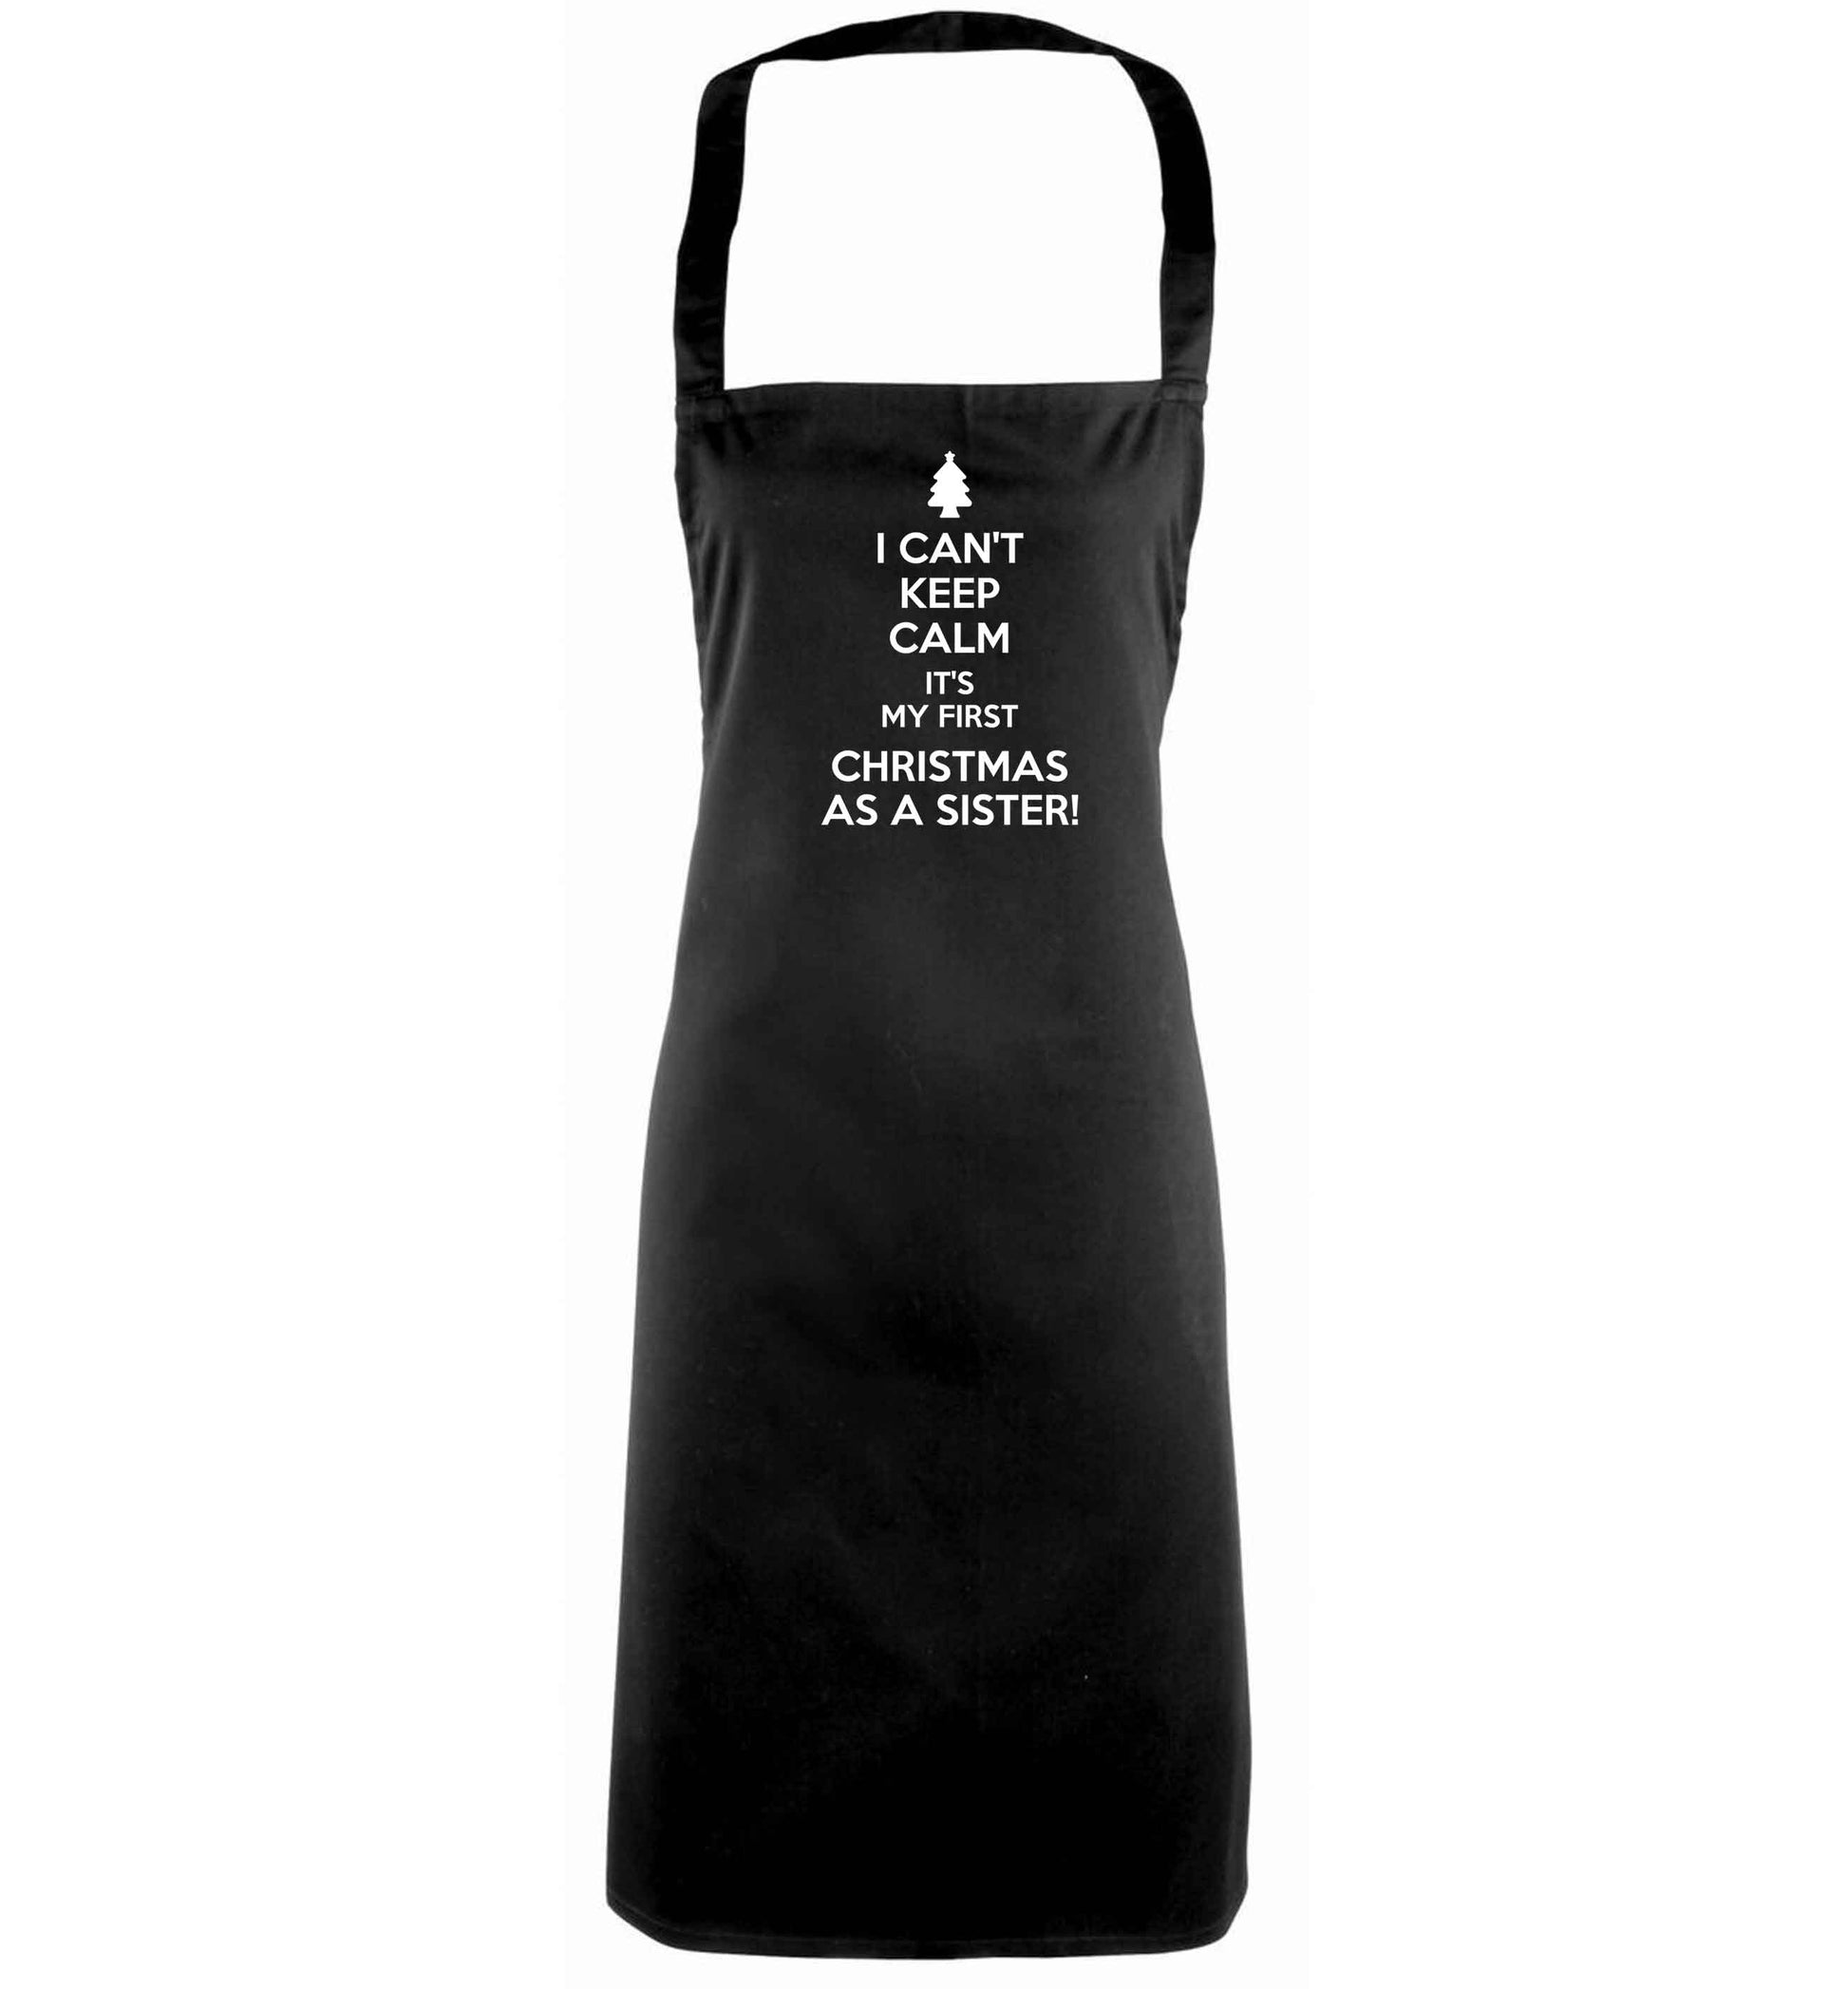 I can't keep calm it's my first Christmas as a sister! black apron